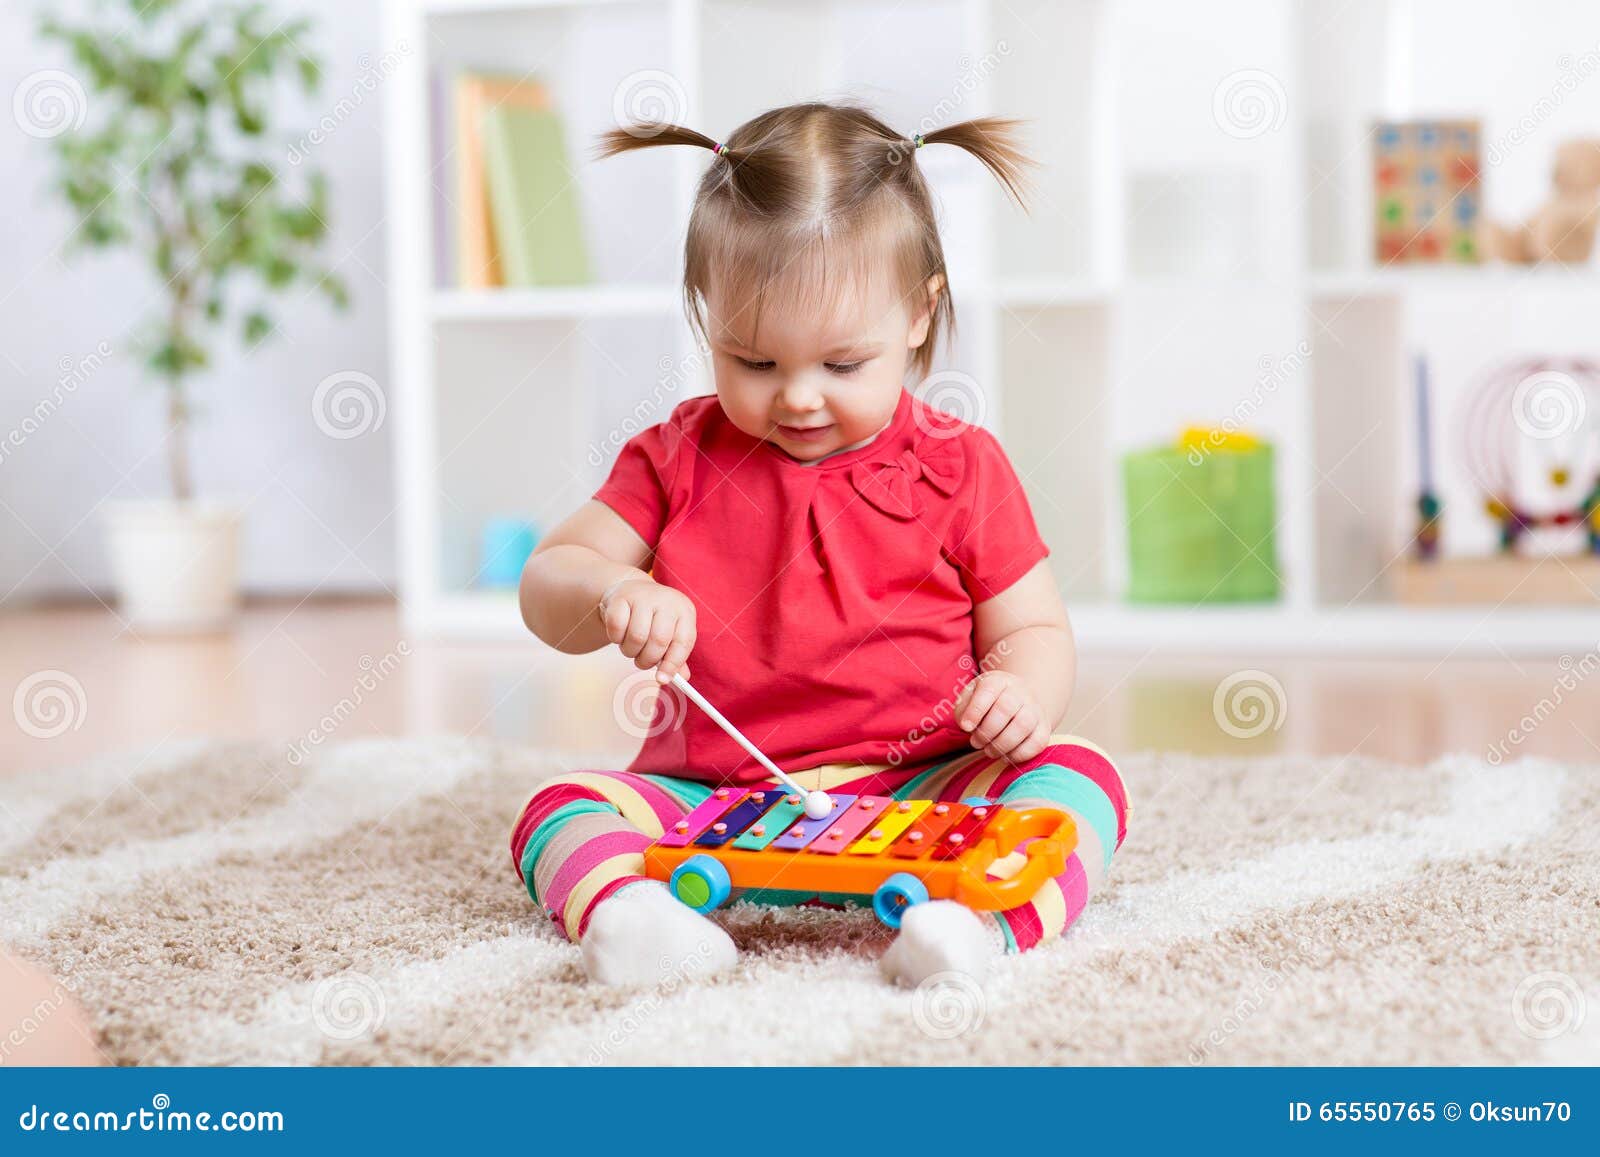 child little girl plays a musical instrument